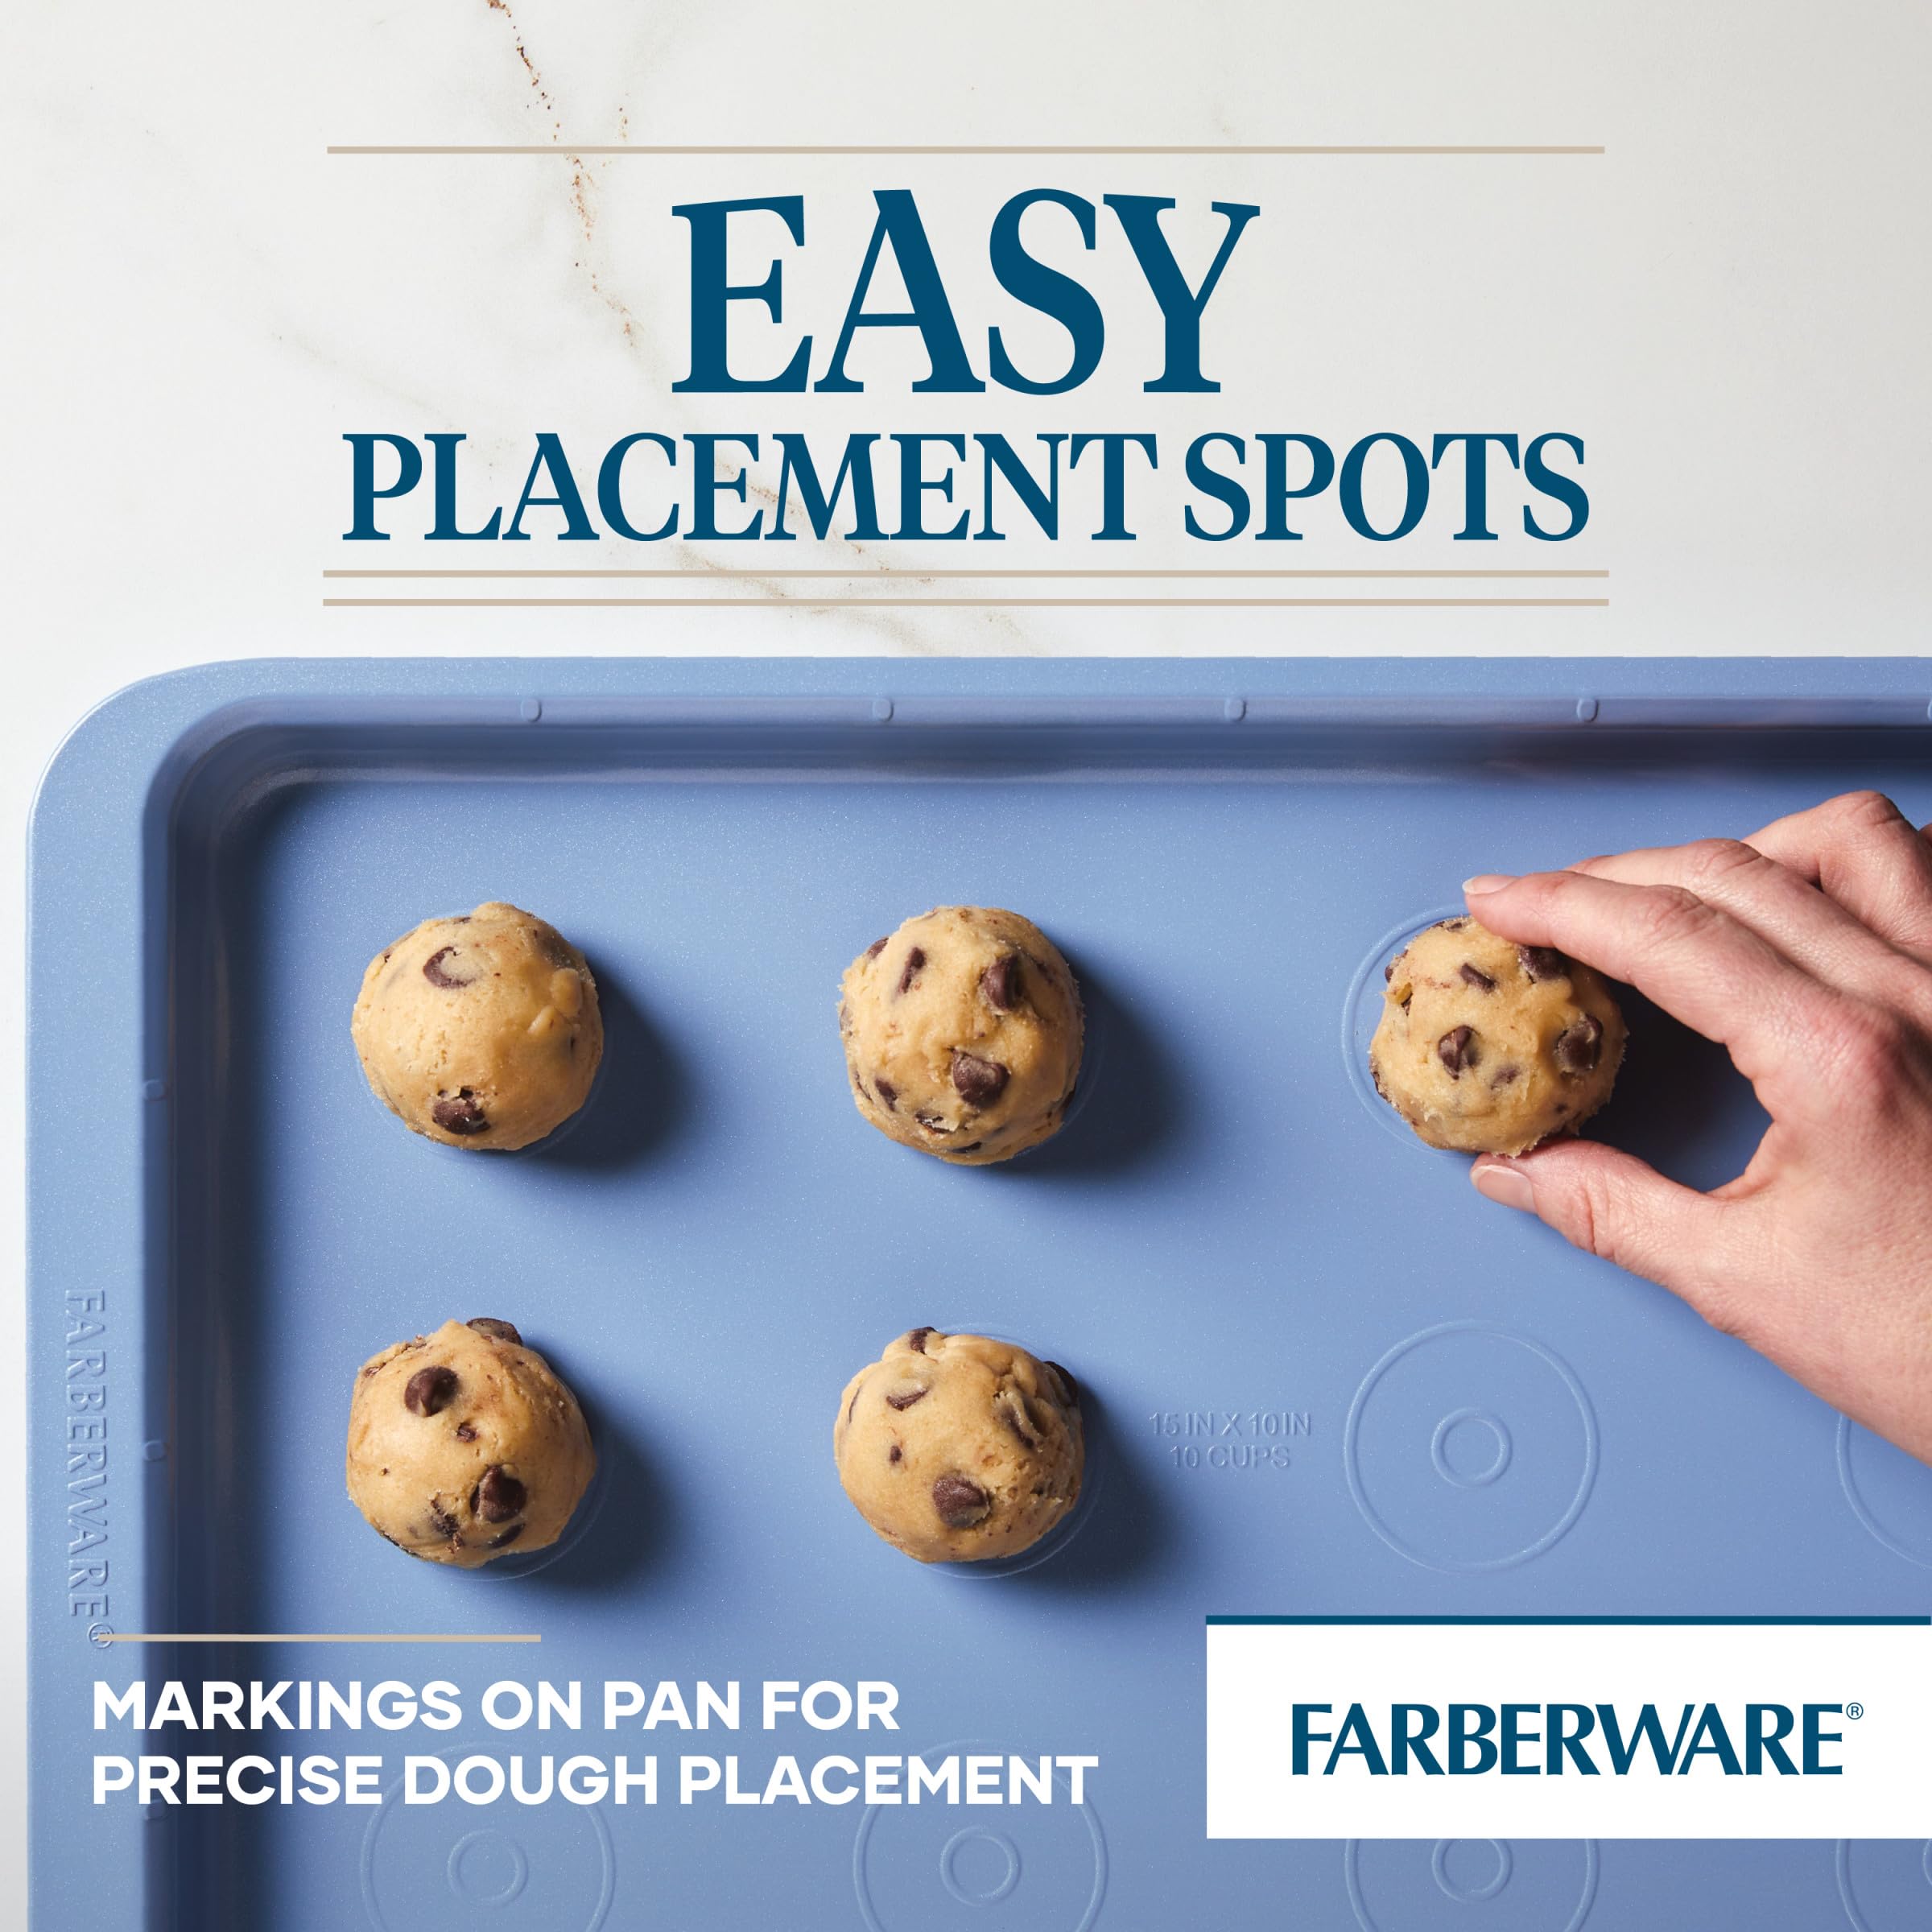 Farberware Easy Solutions Nonstick Bakeware/Baking Set, Includes Cookie Pans, Loaf Pan, and Cake Pan, 4 Piece - Blue